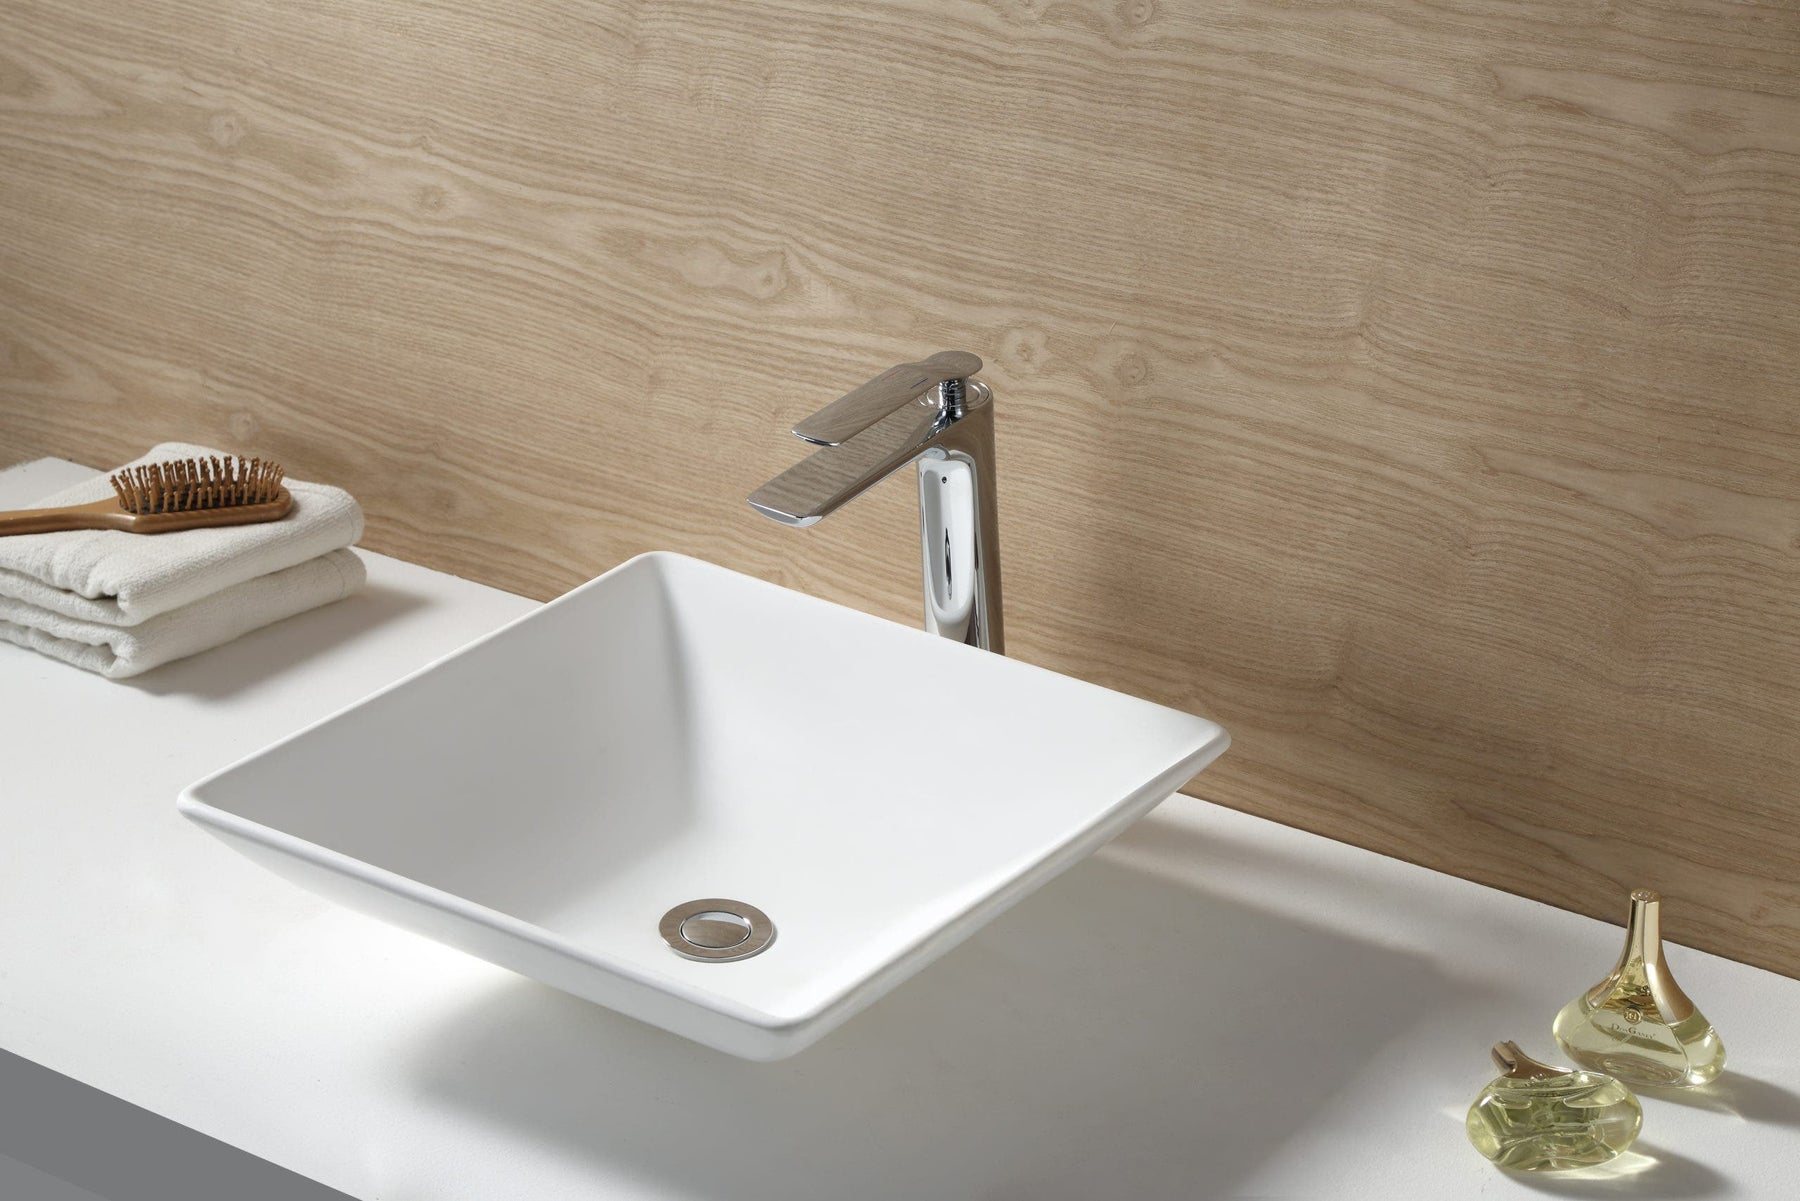 The Sturdiness of the Solid Surface Vessel Sink is Built to Last, EVA16165